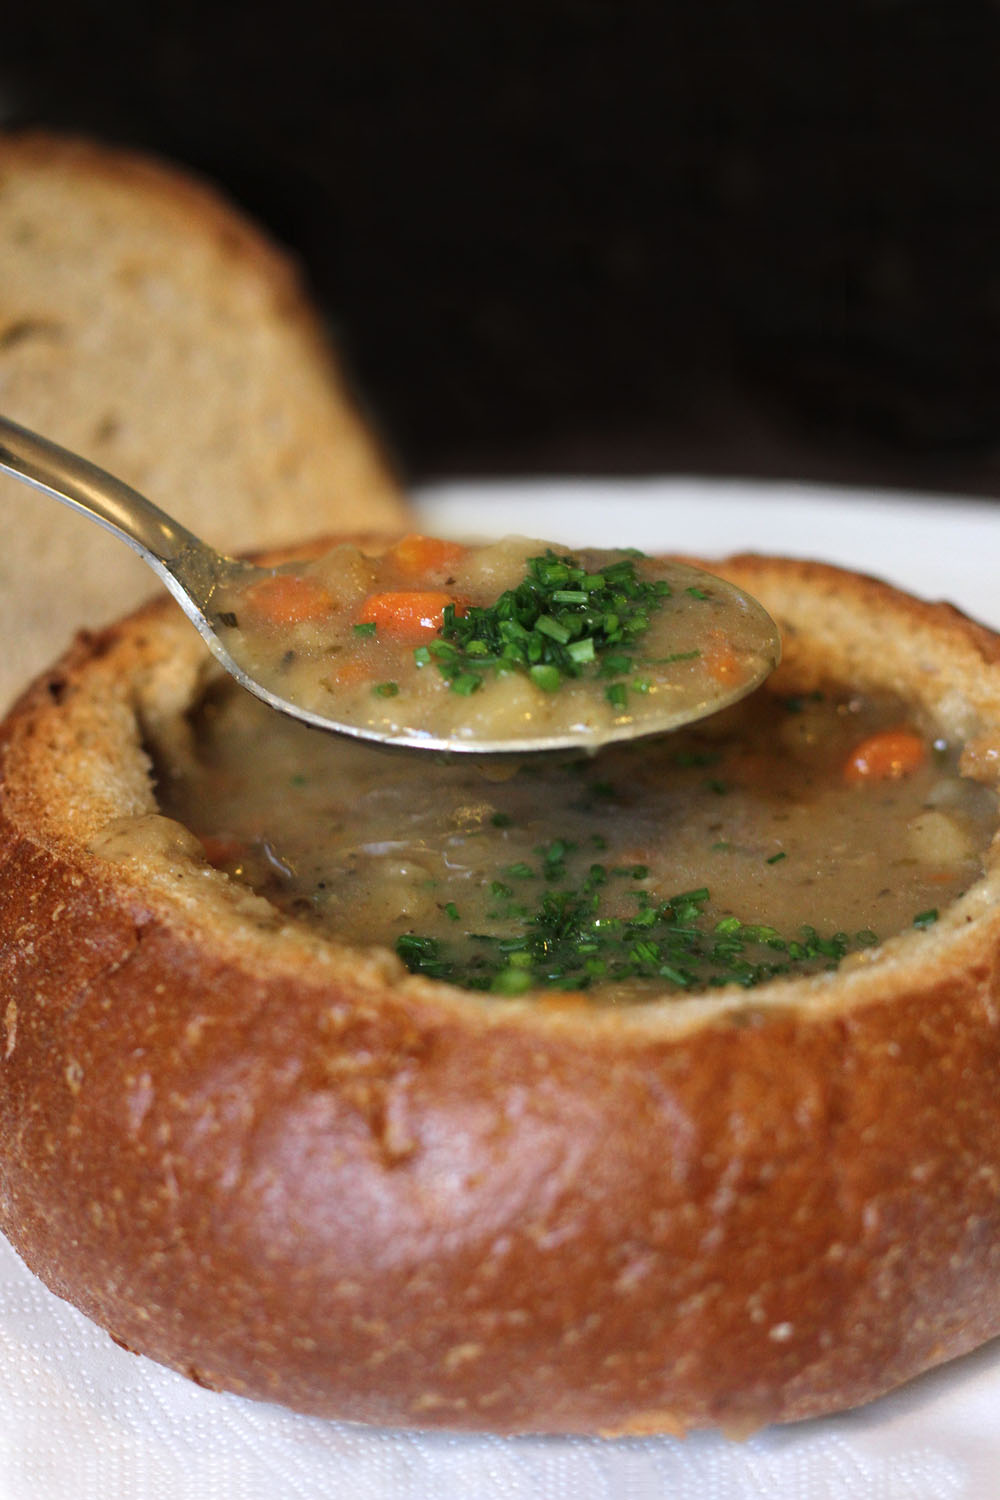 Classic Bohemian potato soup made from potatoes, vegetables, ceps, garlic and marjoram, served in the crust of a hollow loaf